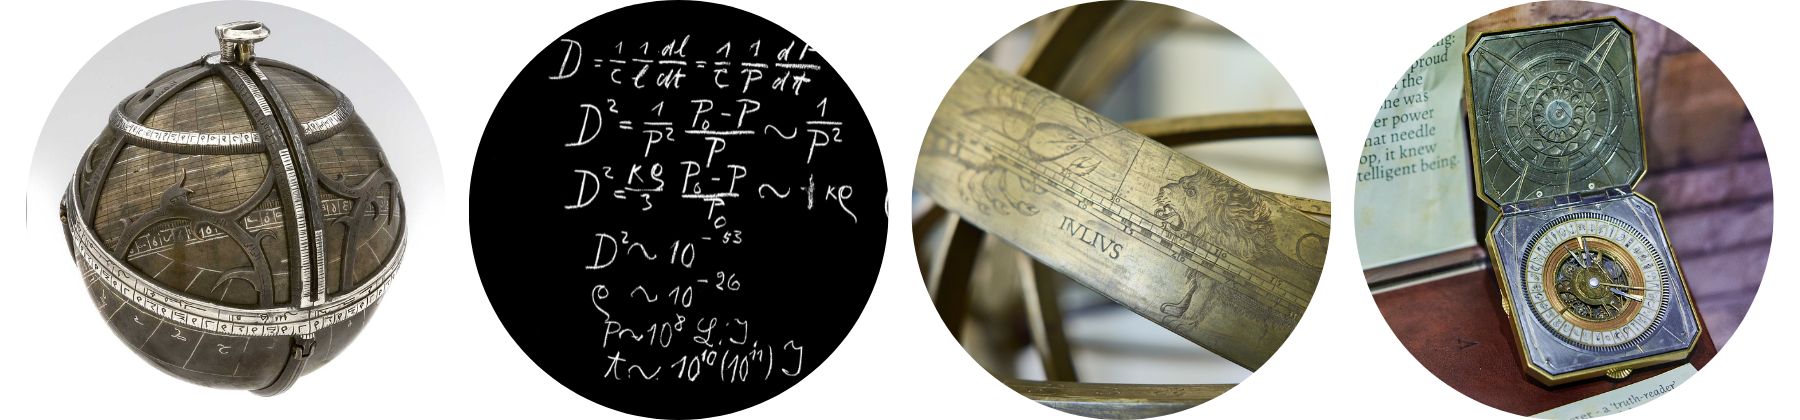 Home page banners (Spherical Astrolabe, Einstein's Blackboard, Armillary Sphere, Collecting COVID)